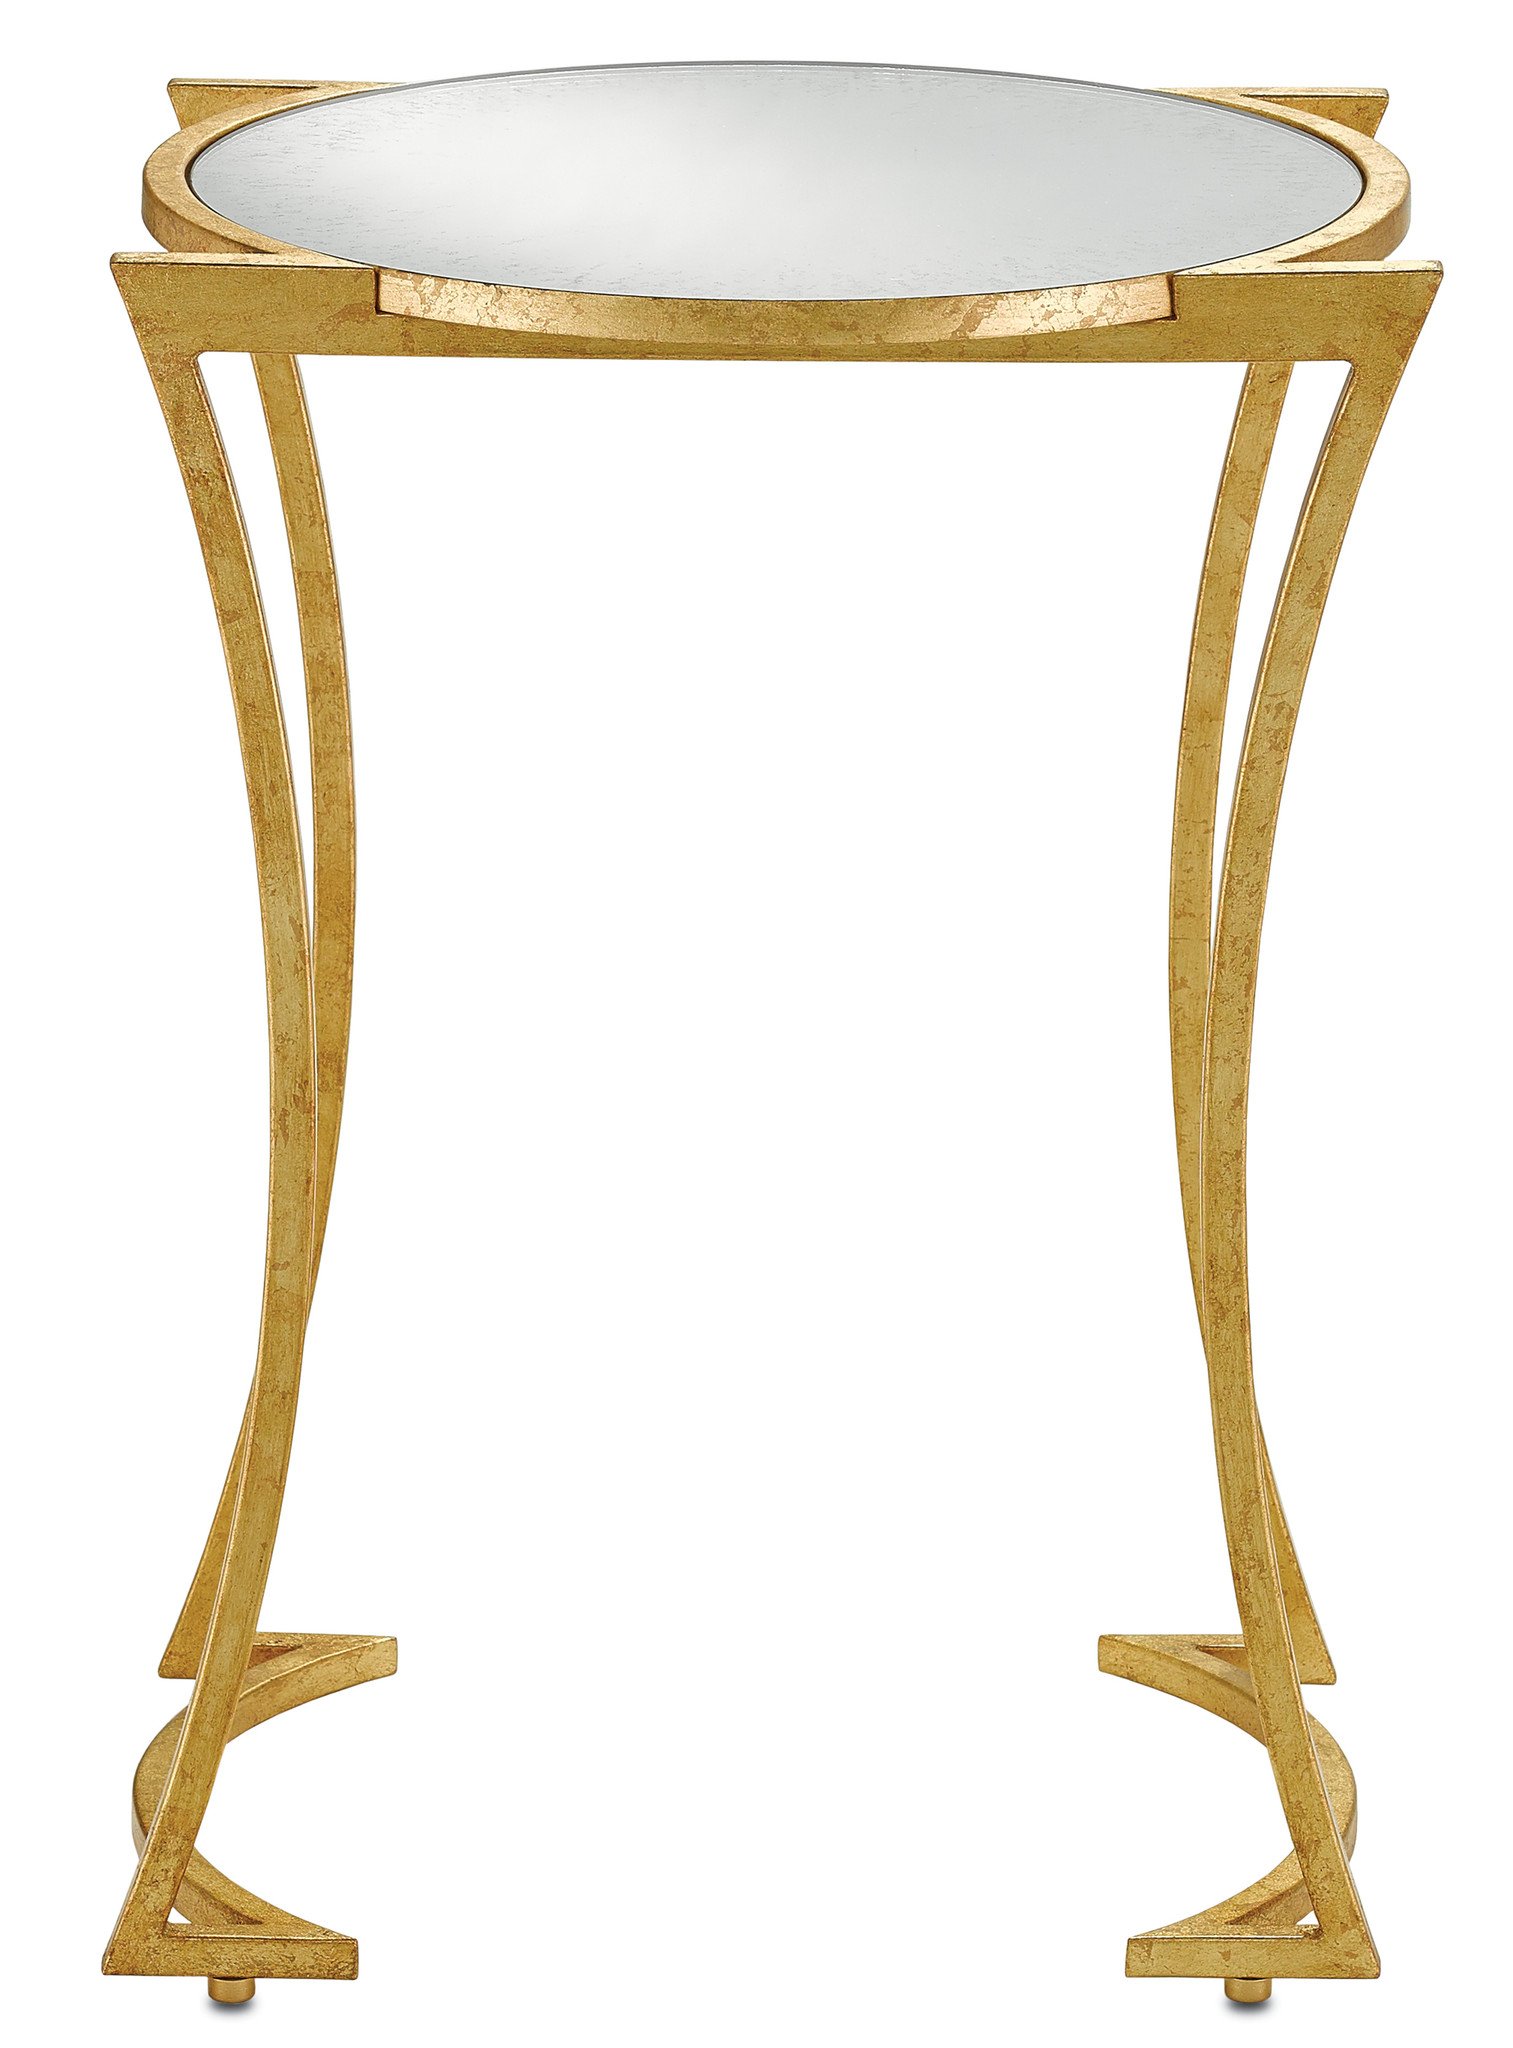 lenox accent table grecian gold leaf design currey company home decor nautical style floor lamps vanity round black glass side urban furniture bbq prep cart wood storage cubes